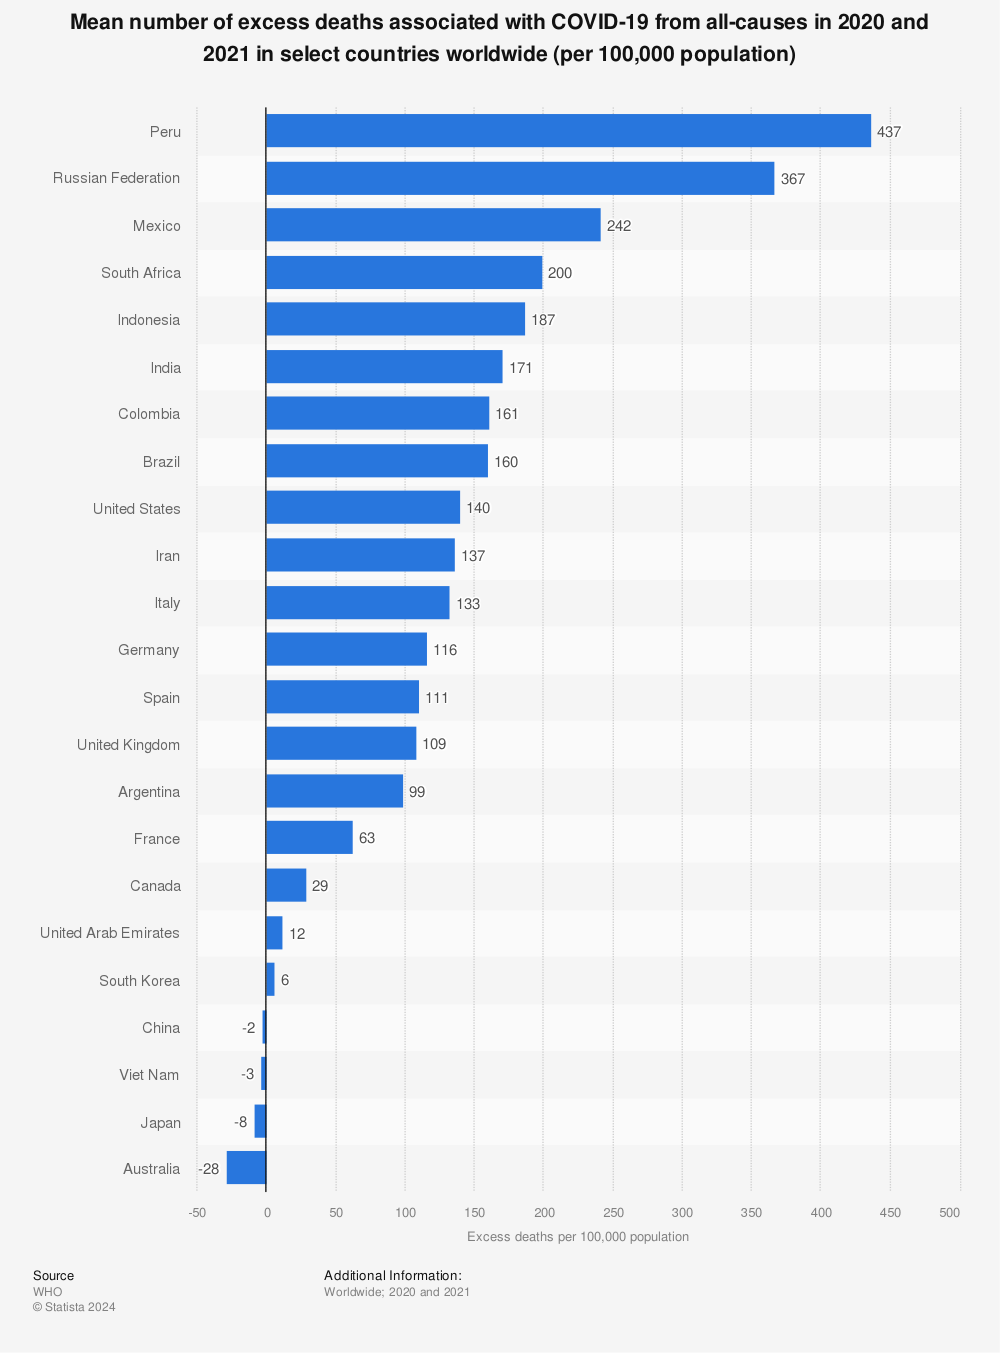 Statistic: Mean number of excess deaths associated with COVID-19 from all-causes in 2020 and 2021 in select countries worldwide (per 100,000 population) | Statista